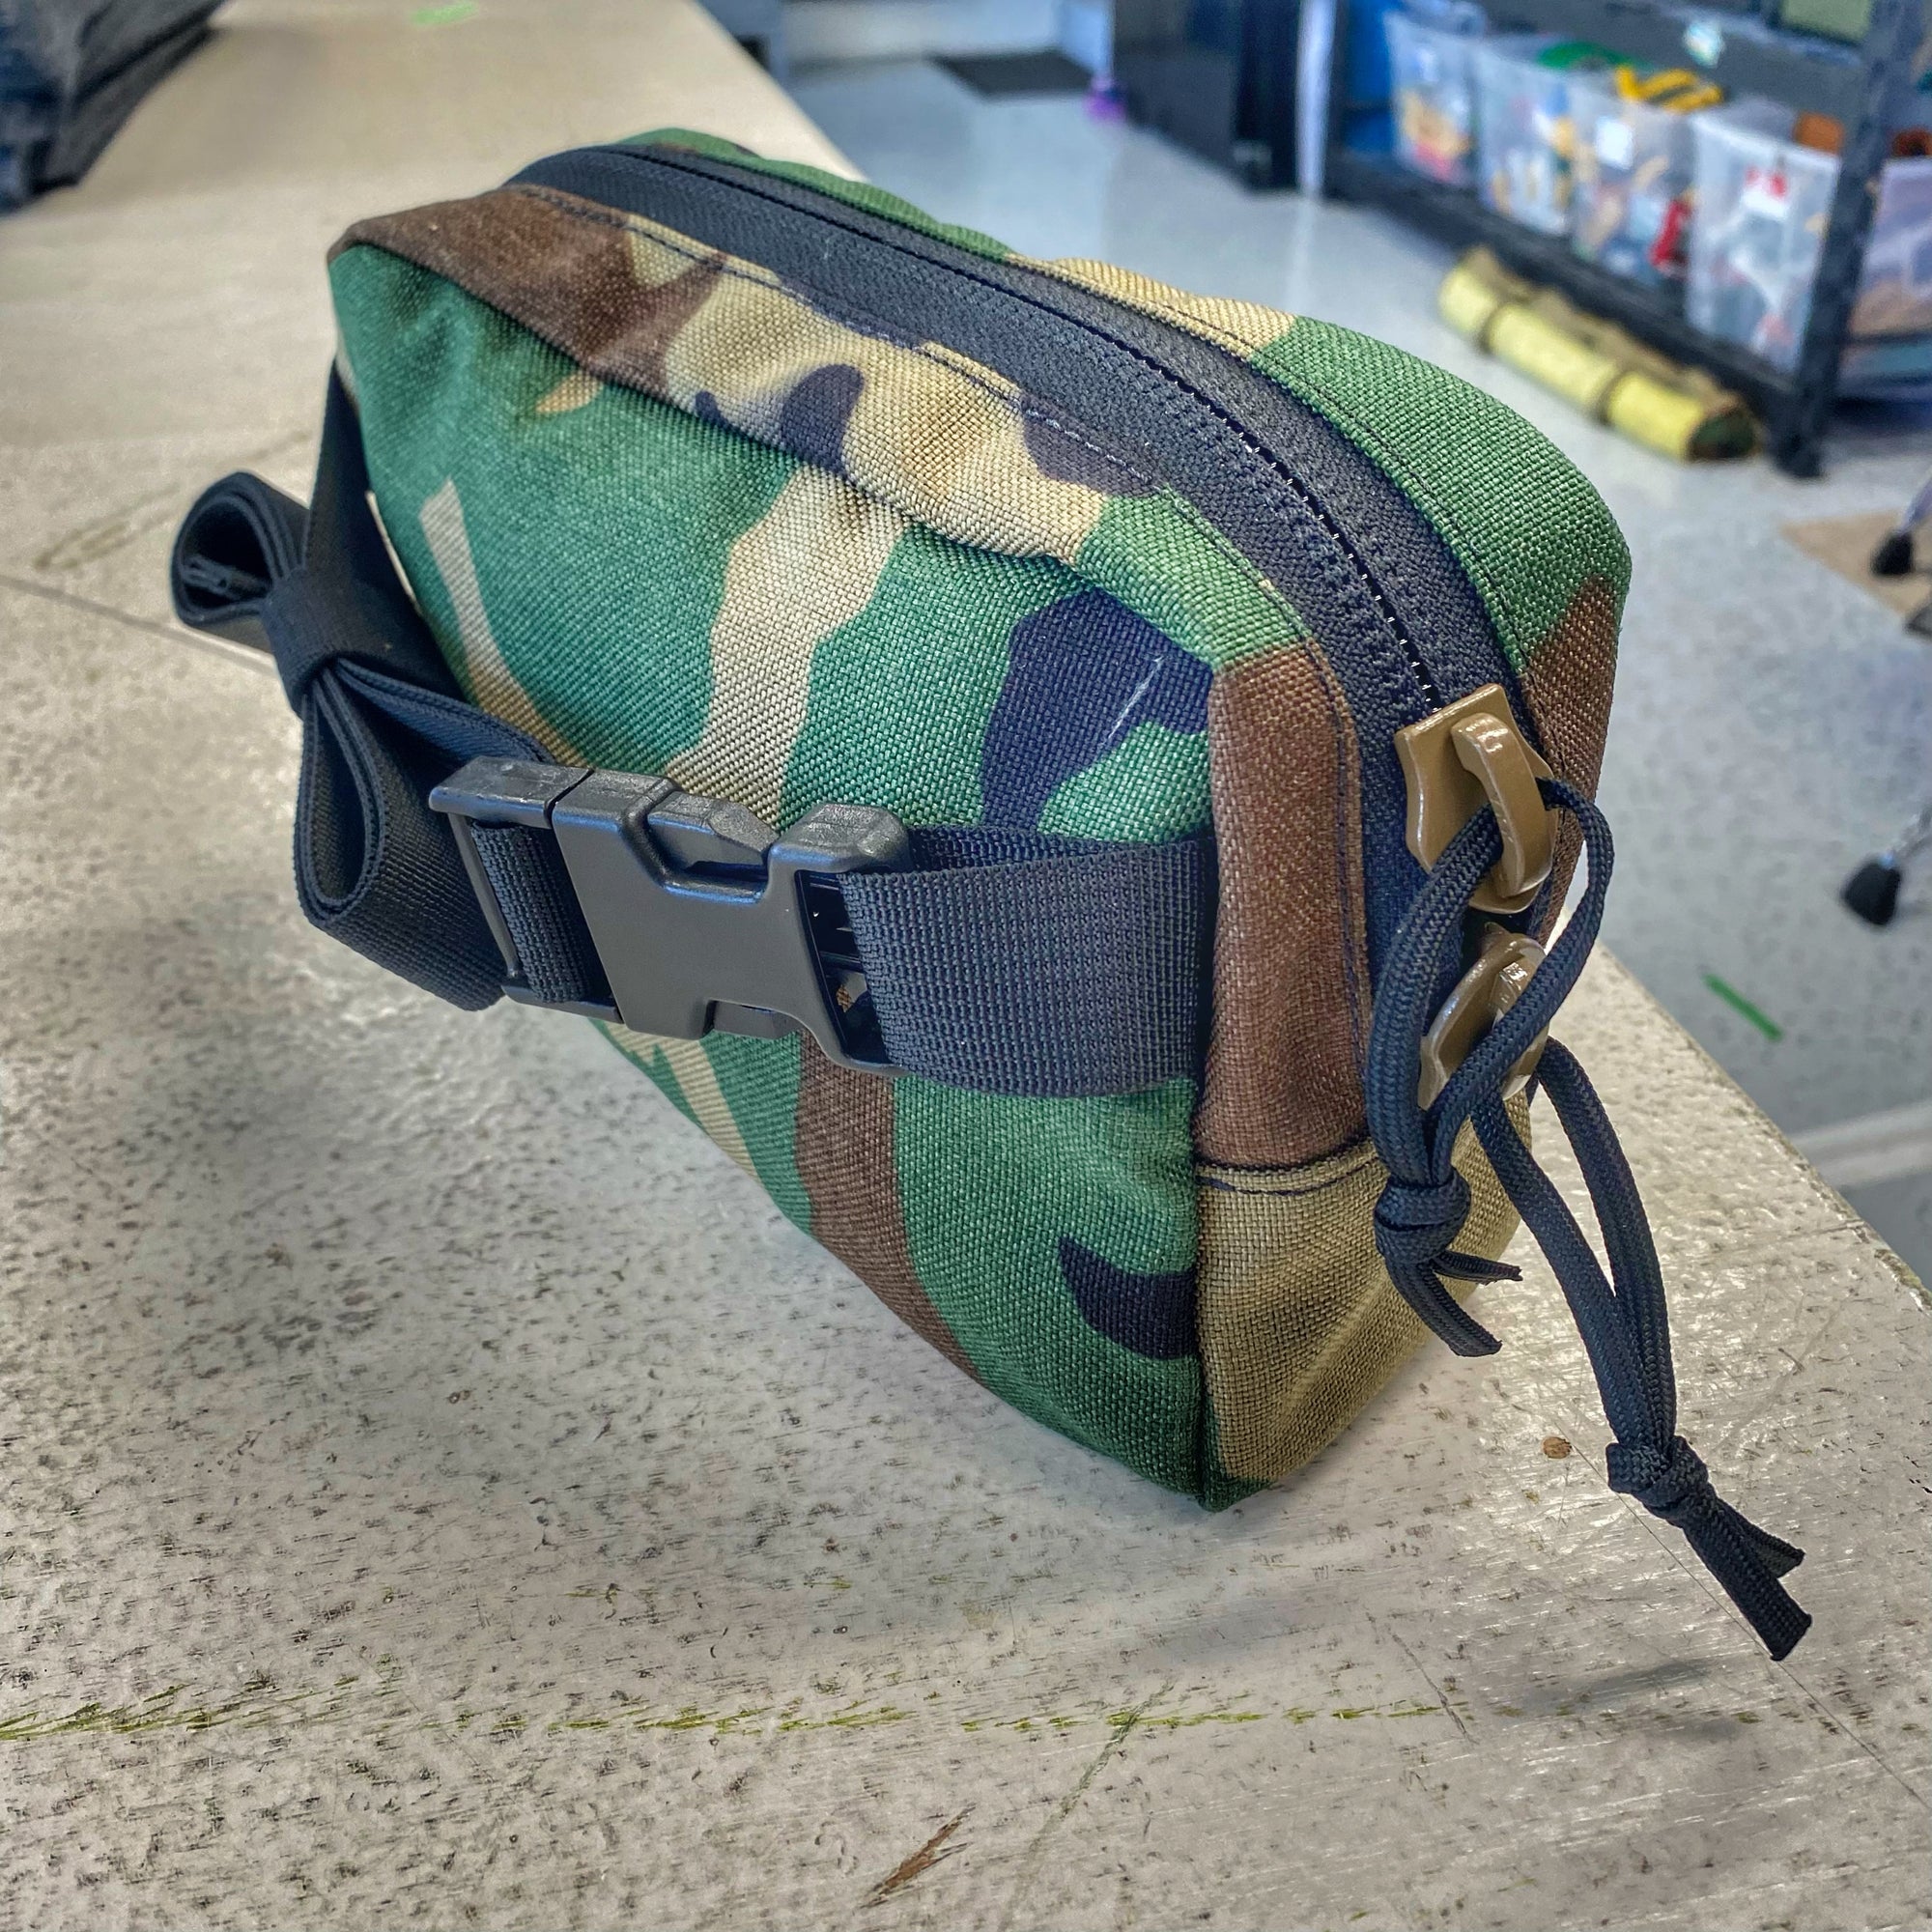 HIP PACK, Made in USA